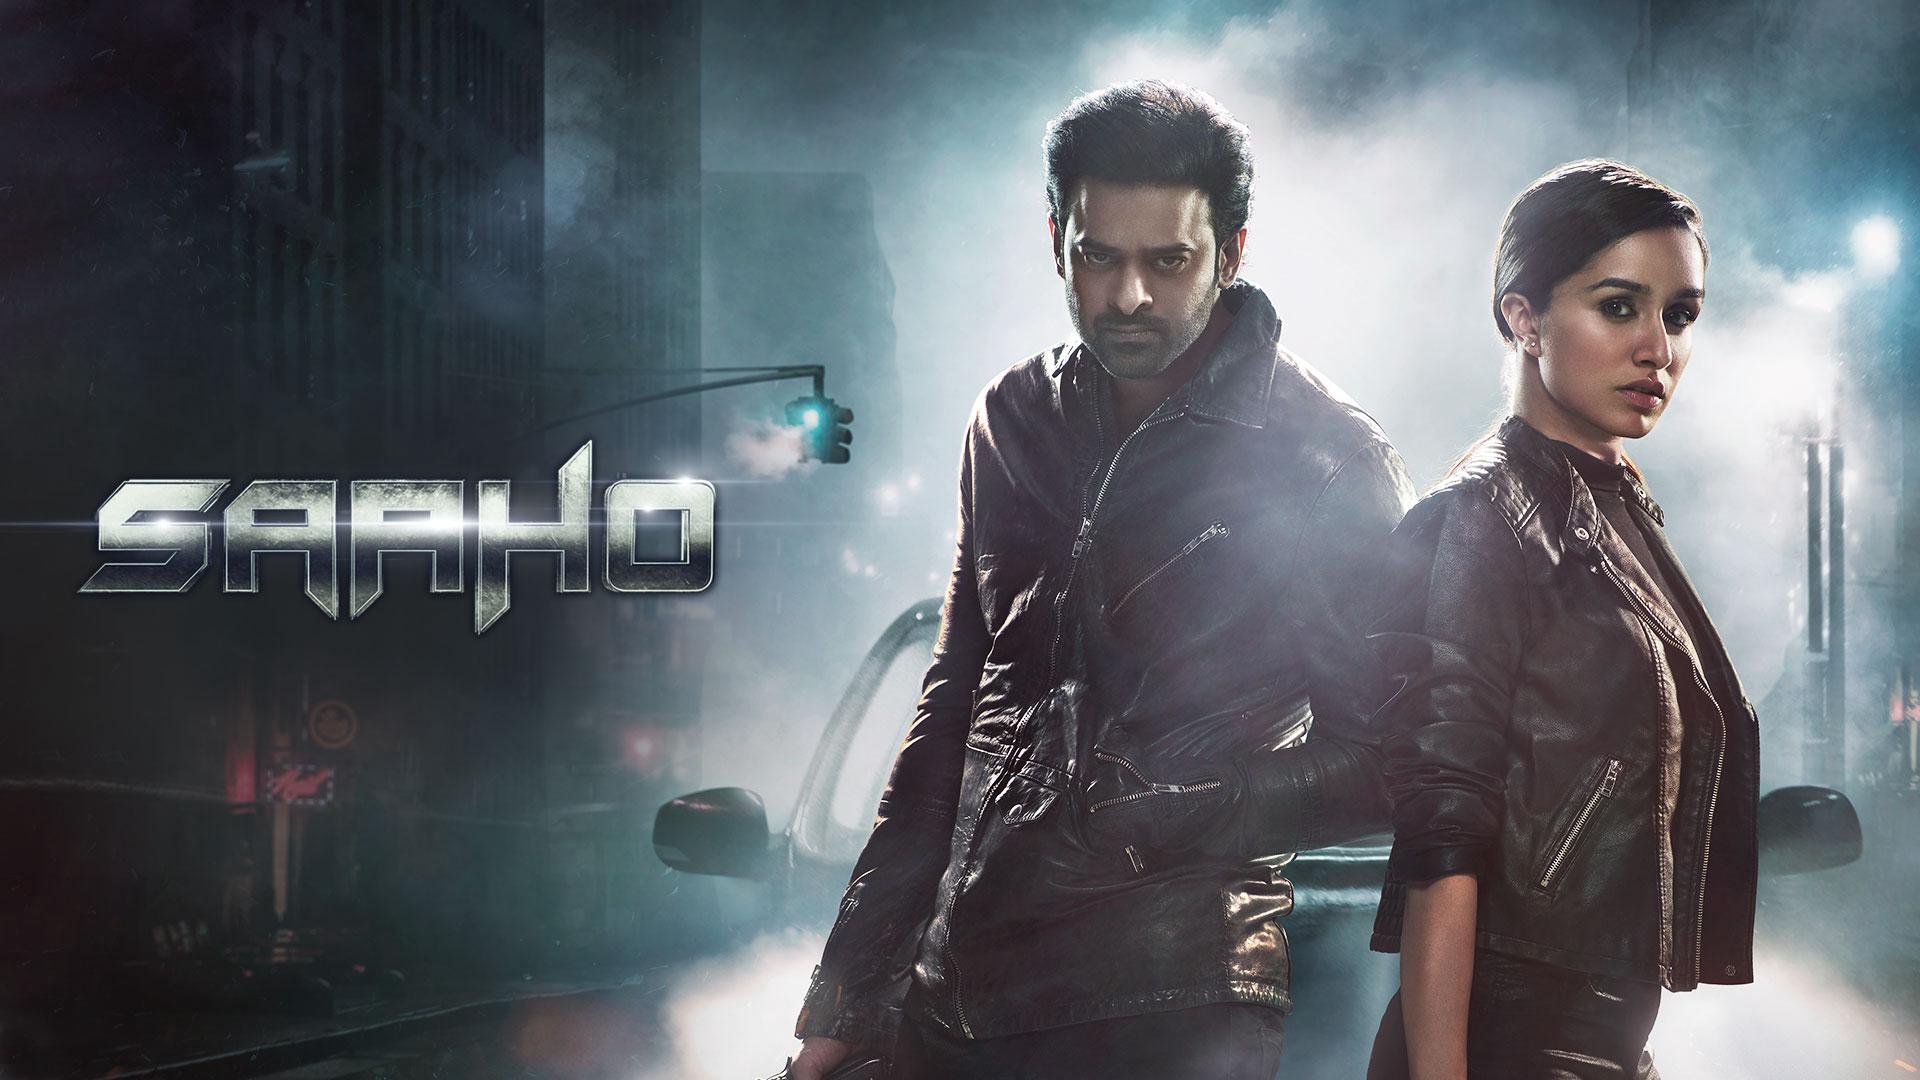 Watch Saaho Full Movie Online in HD Quality | Download Now